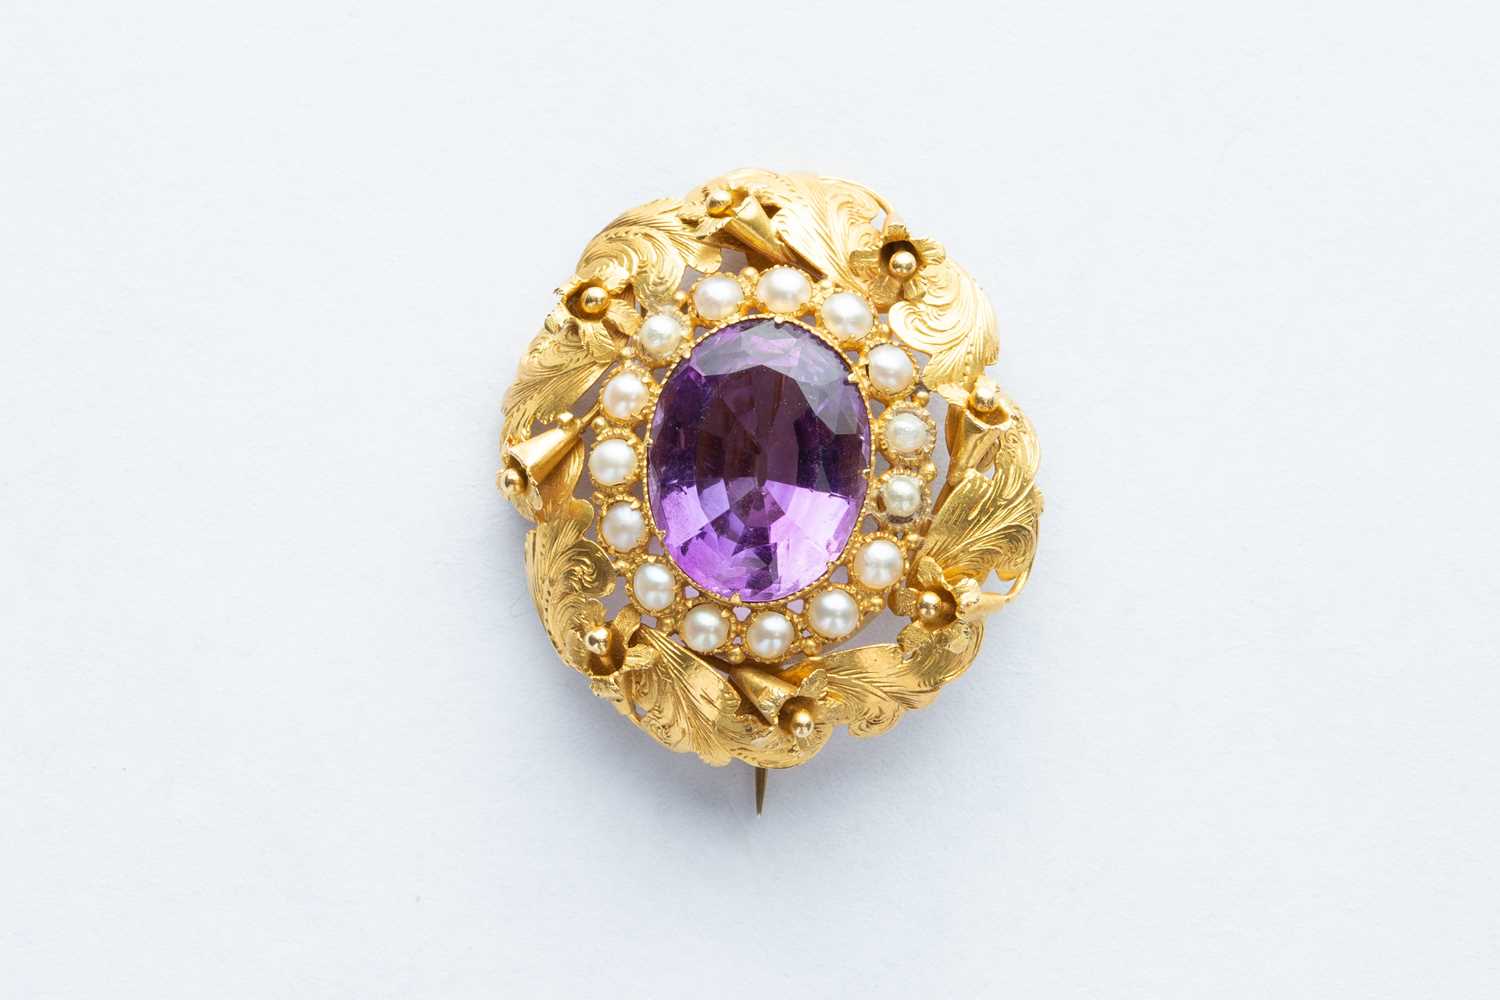 Lot 32 - A 18ct Yellow Gold Amethyst & Seed Pearl Floral Brooch